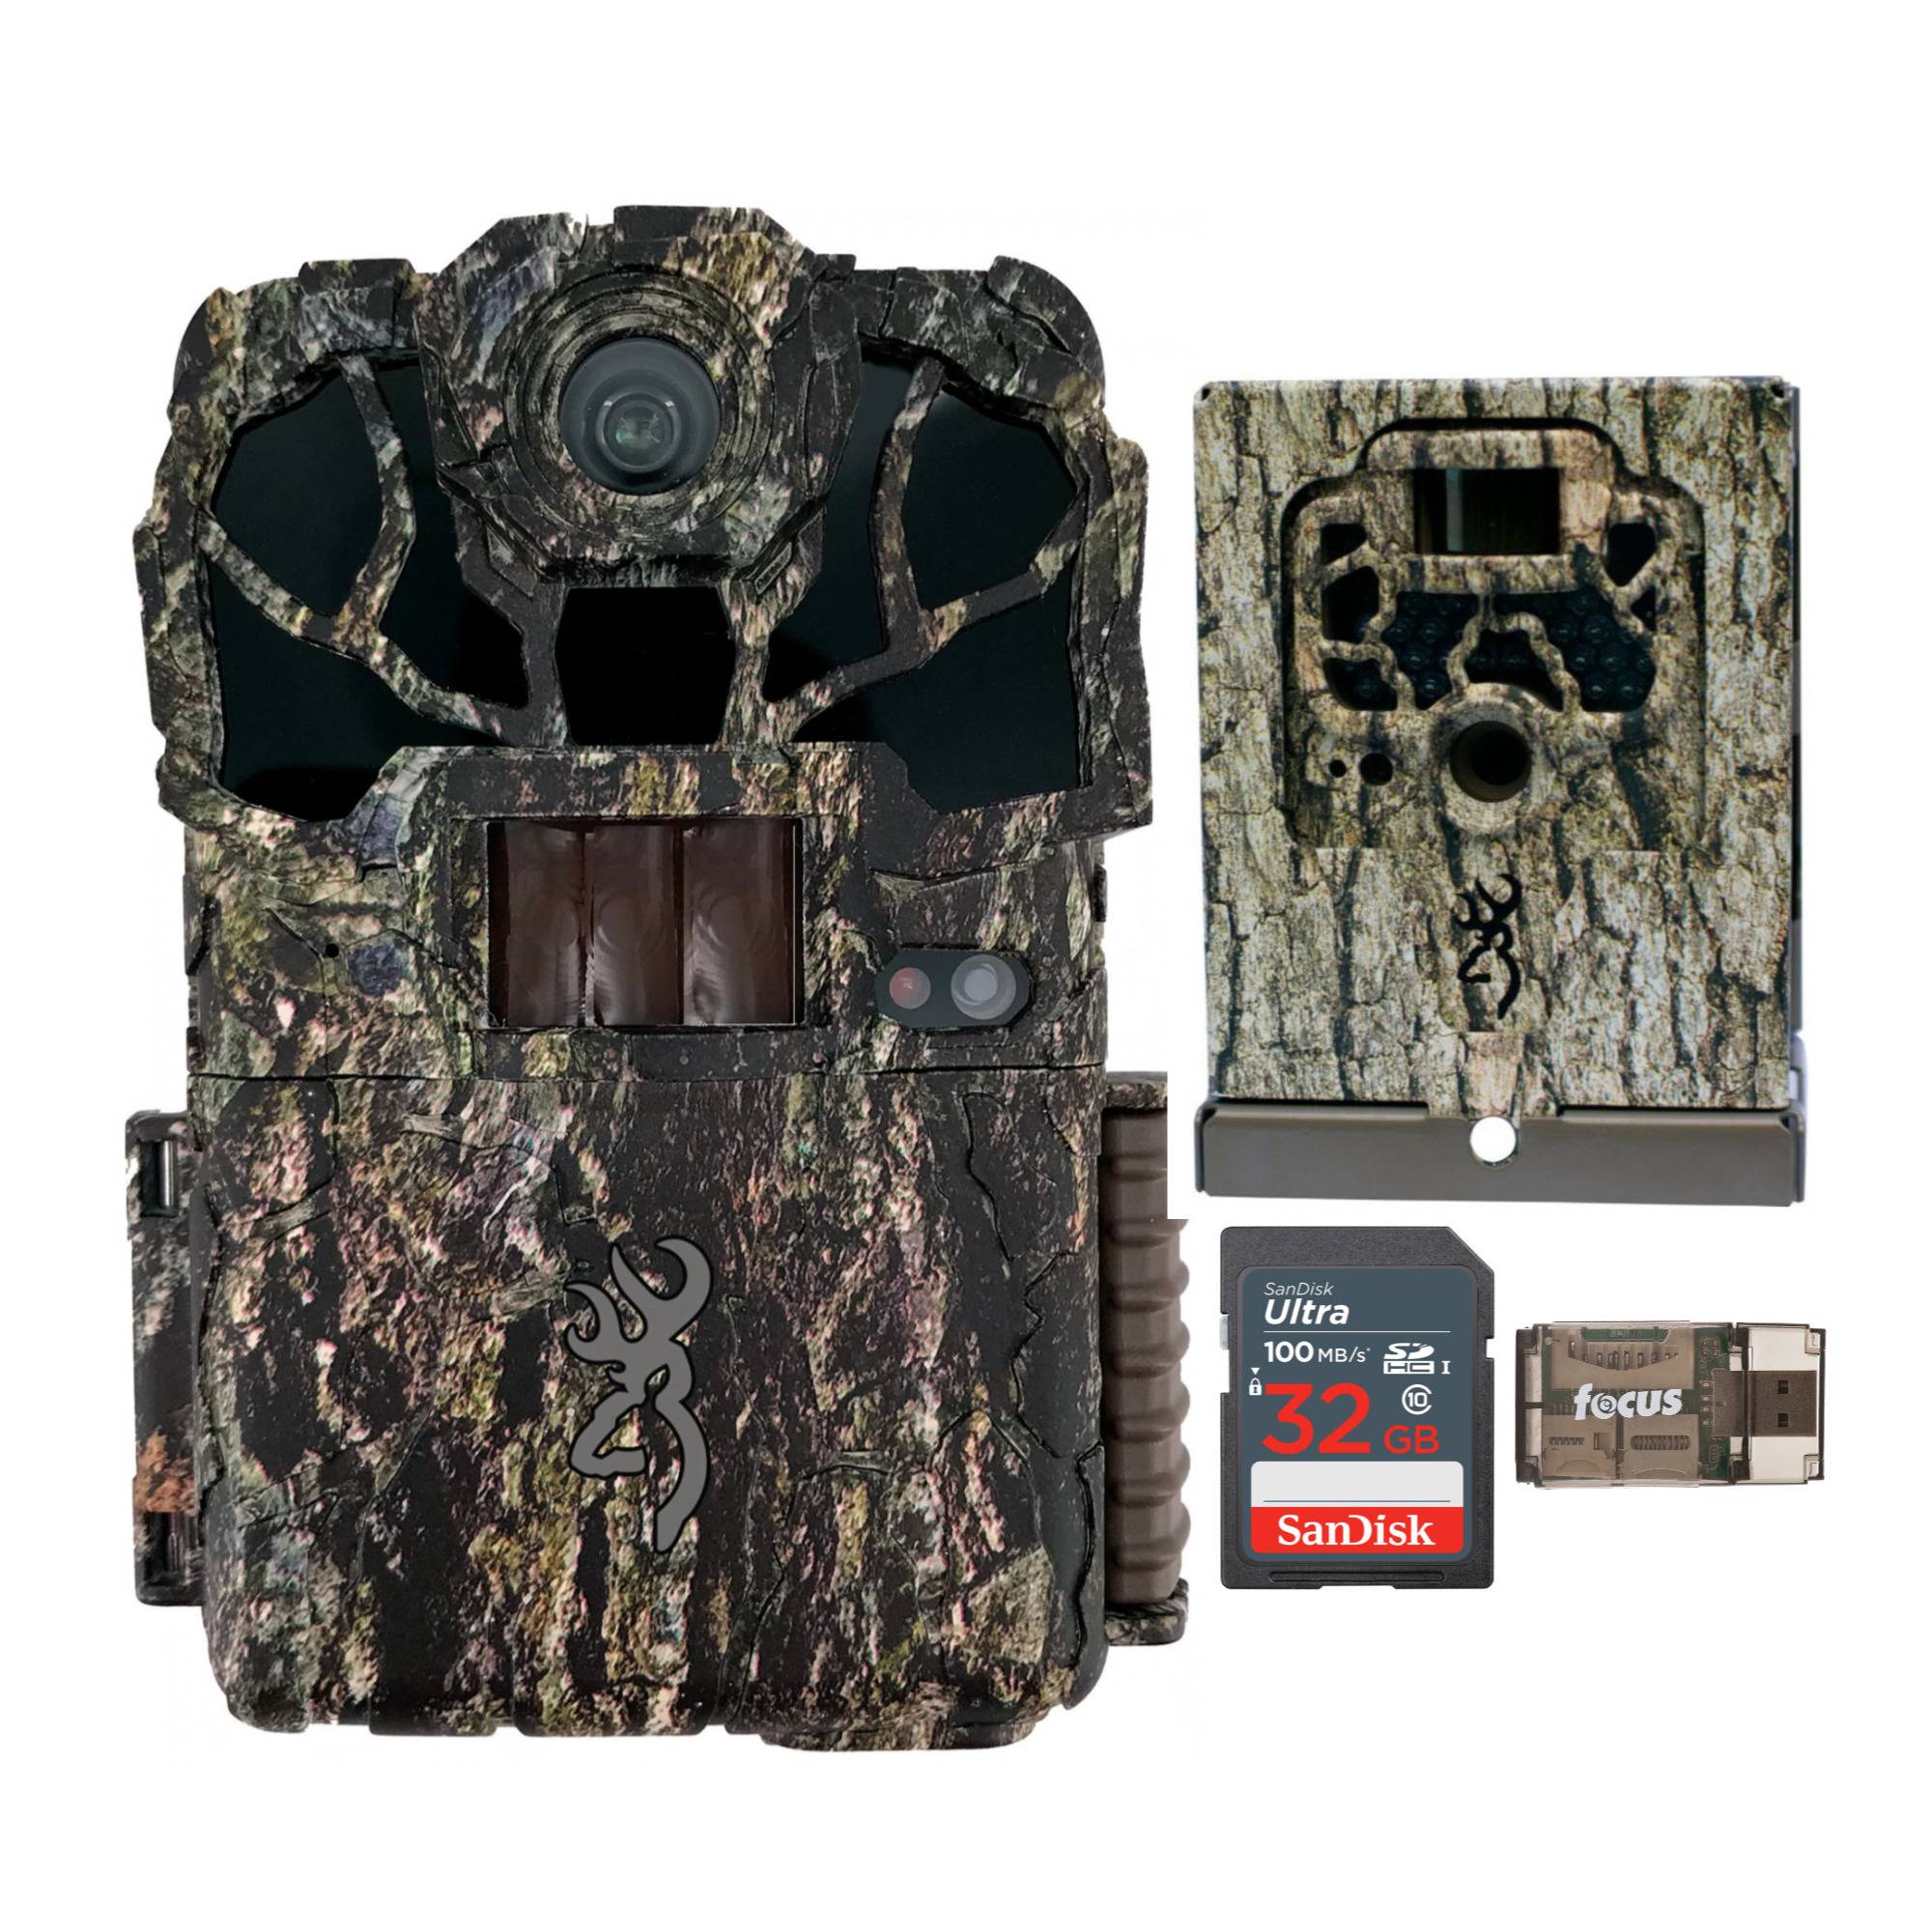 Browning Spec Ops Elite HP5 Trail Camera with Security Box, 32GB Memory Card and Card Reader